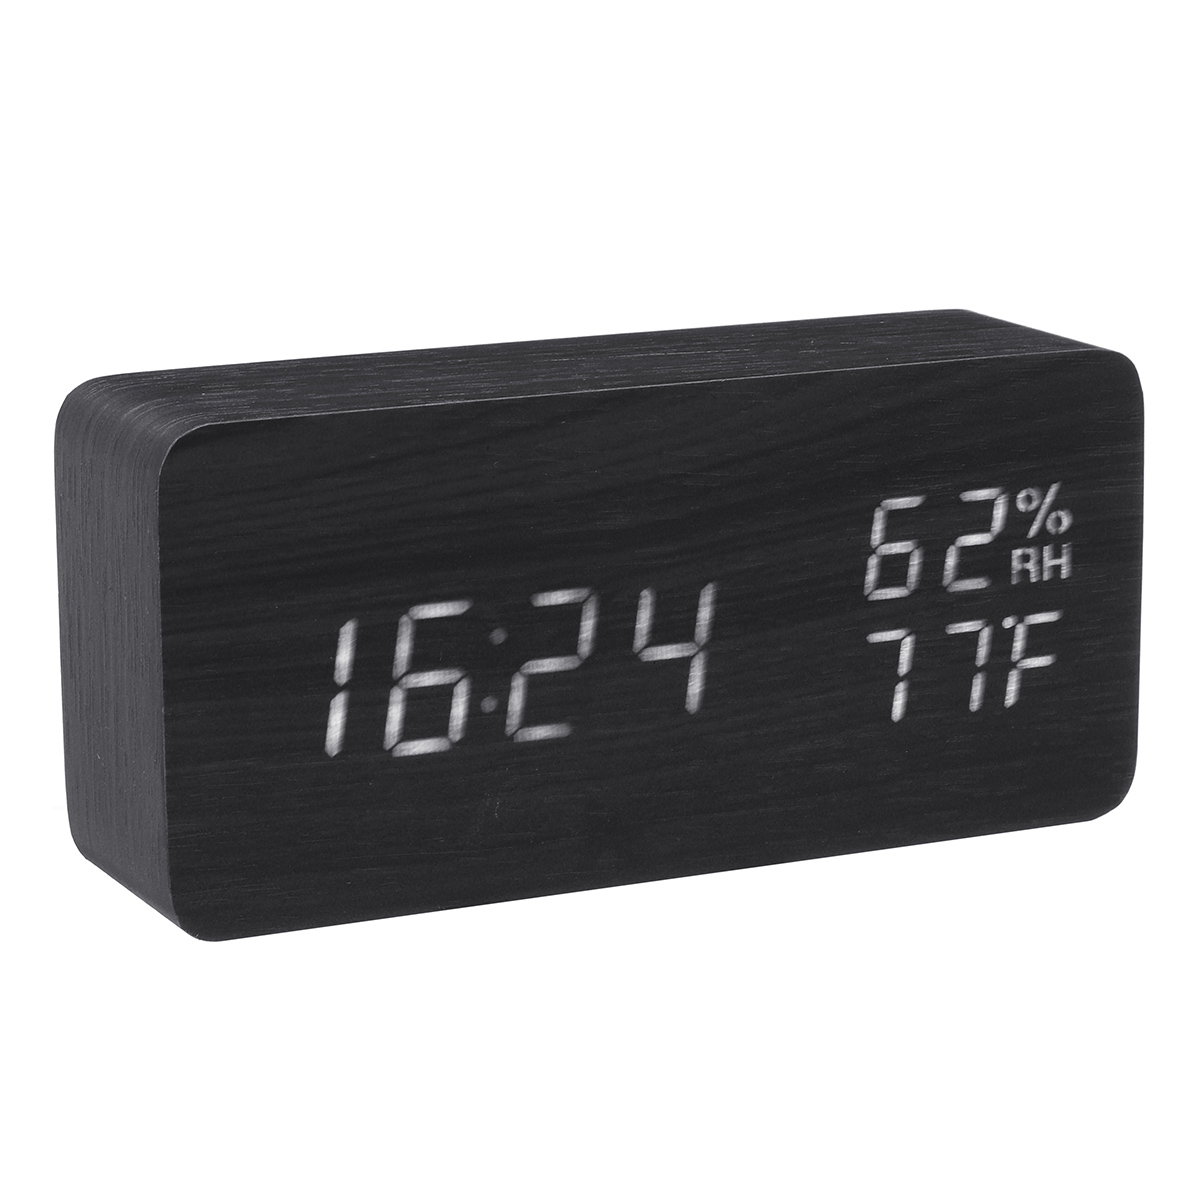 Modern-Wooden-Wood-Digital-Thermometer-USB-Charger-LED-Desk-Alarm-Wireless-Clock-1739446-8